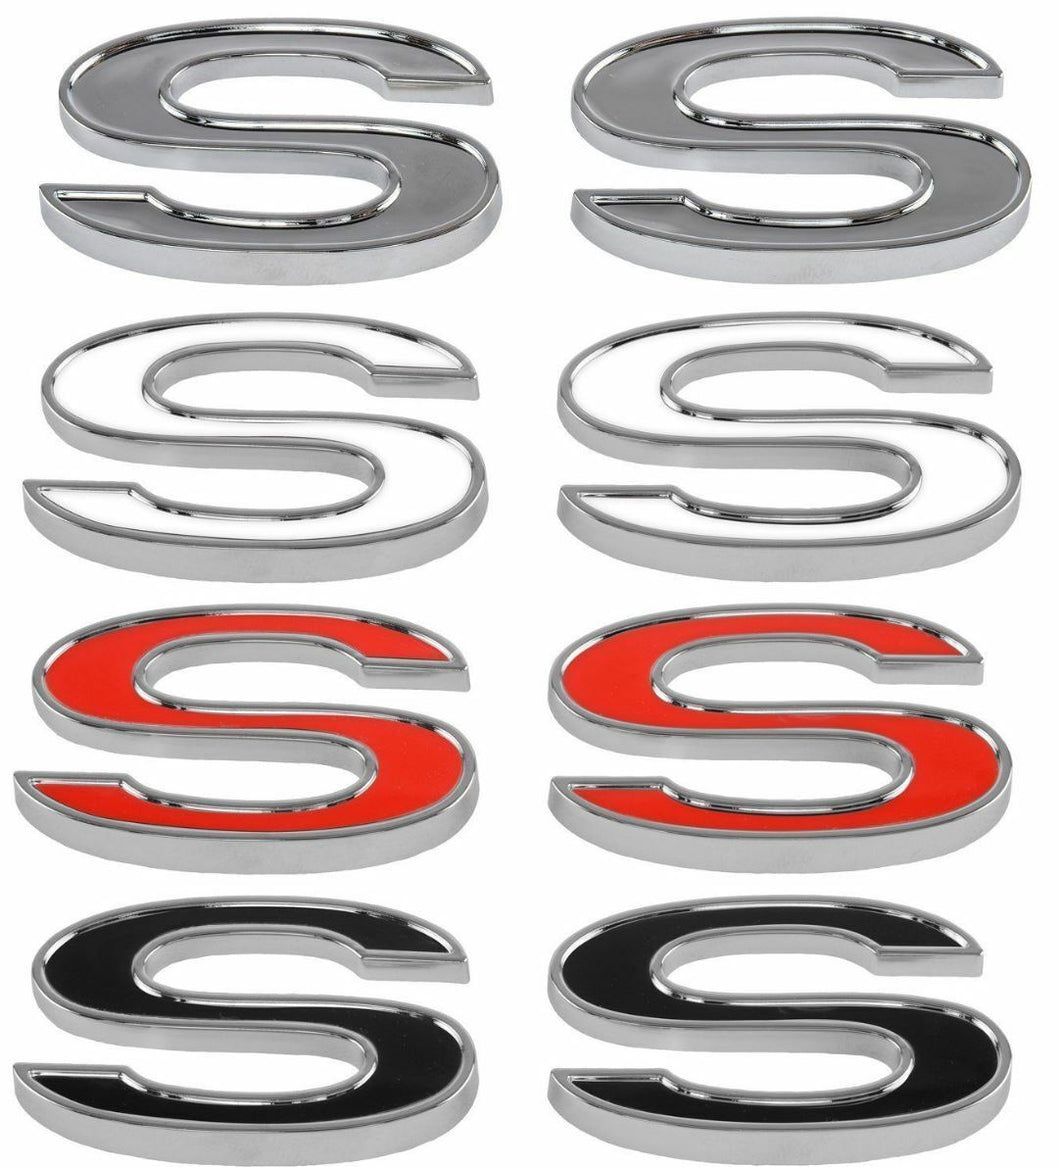 Trim Parts Adhesive Backed SS Emblem Set White Red Black Inserts For GM Vehicles